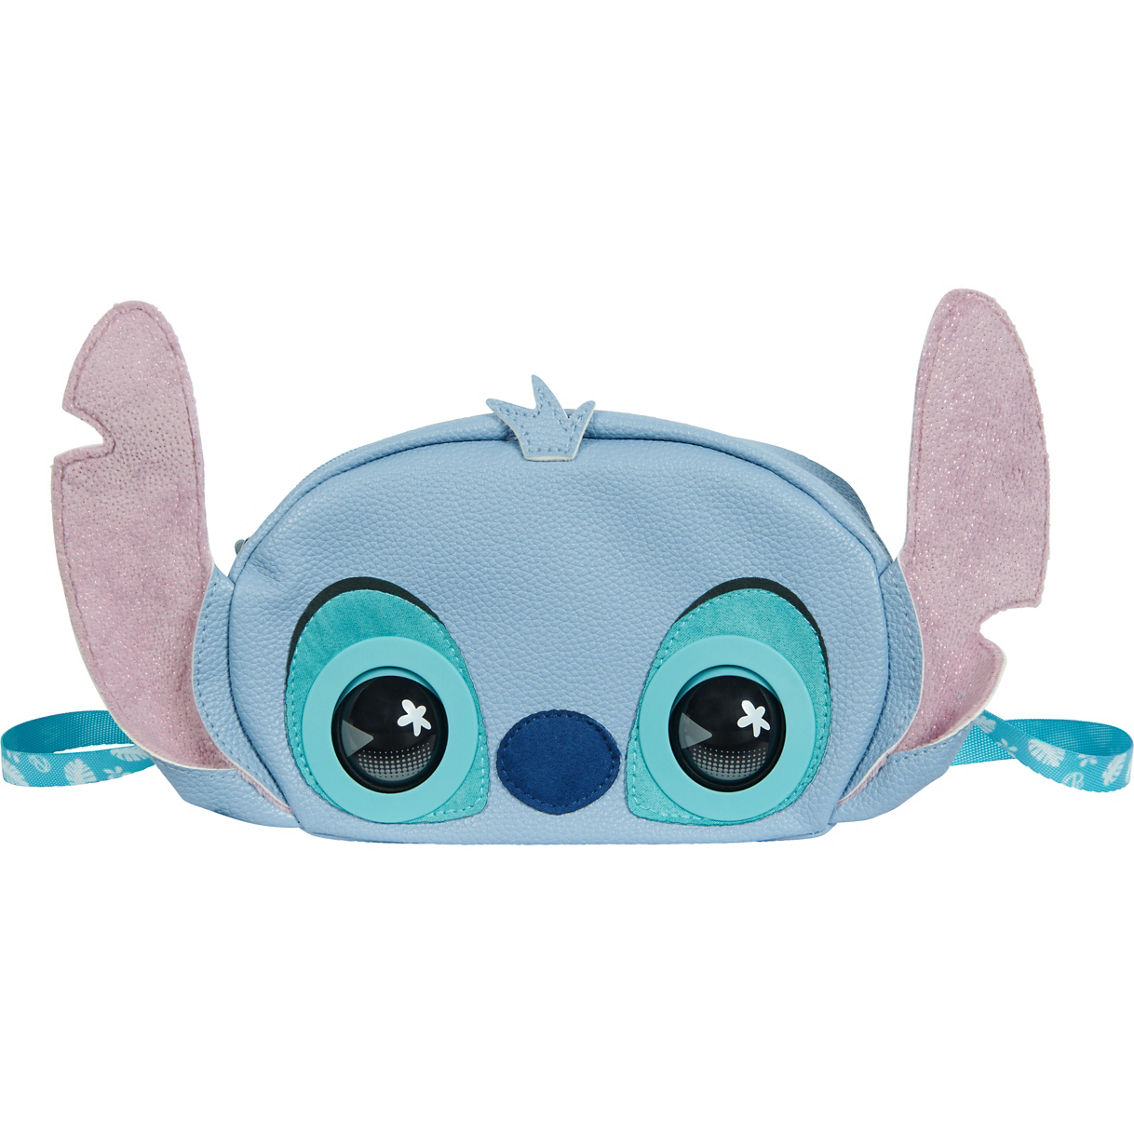 Spin Master Purse Pets Disney Interactive Stitch - Image 4 of 5